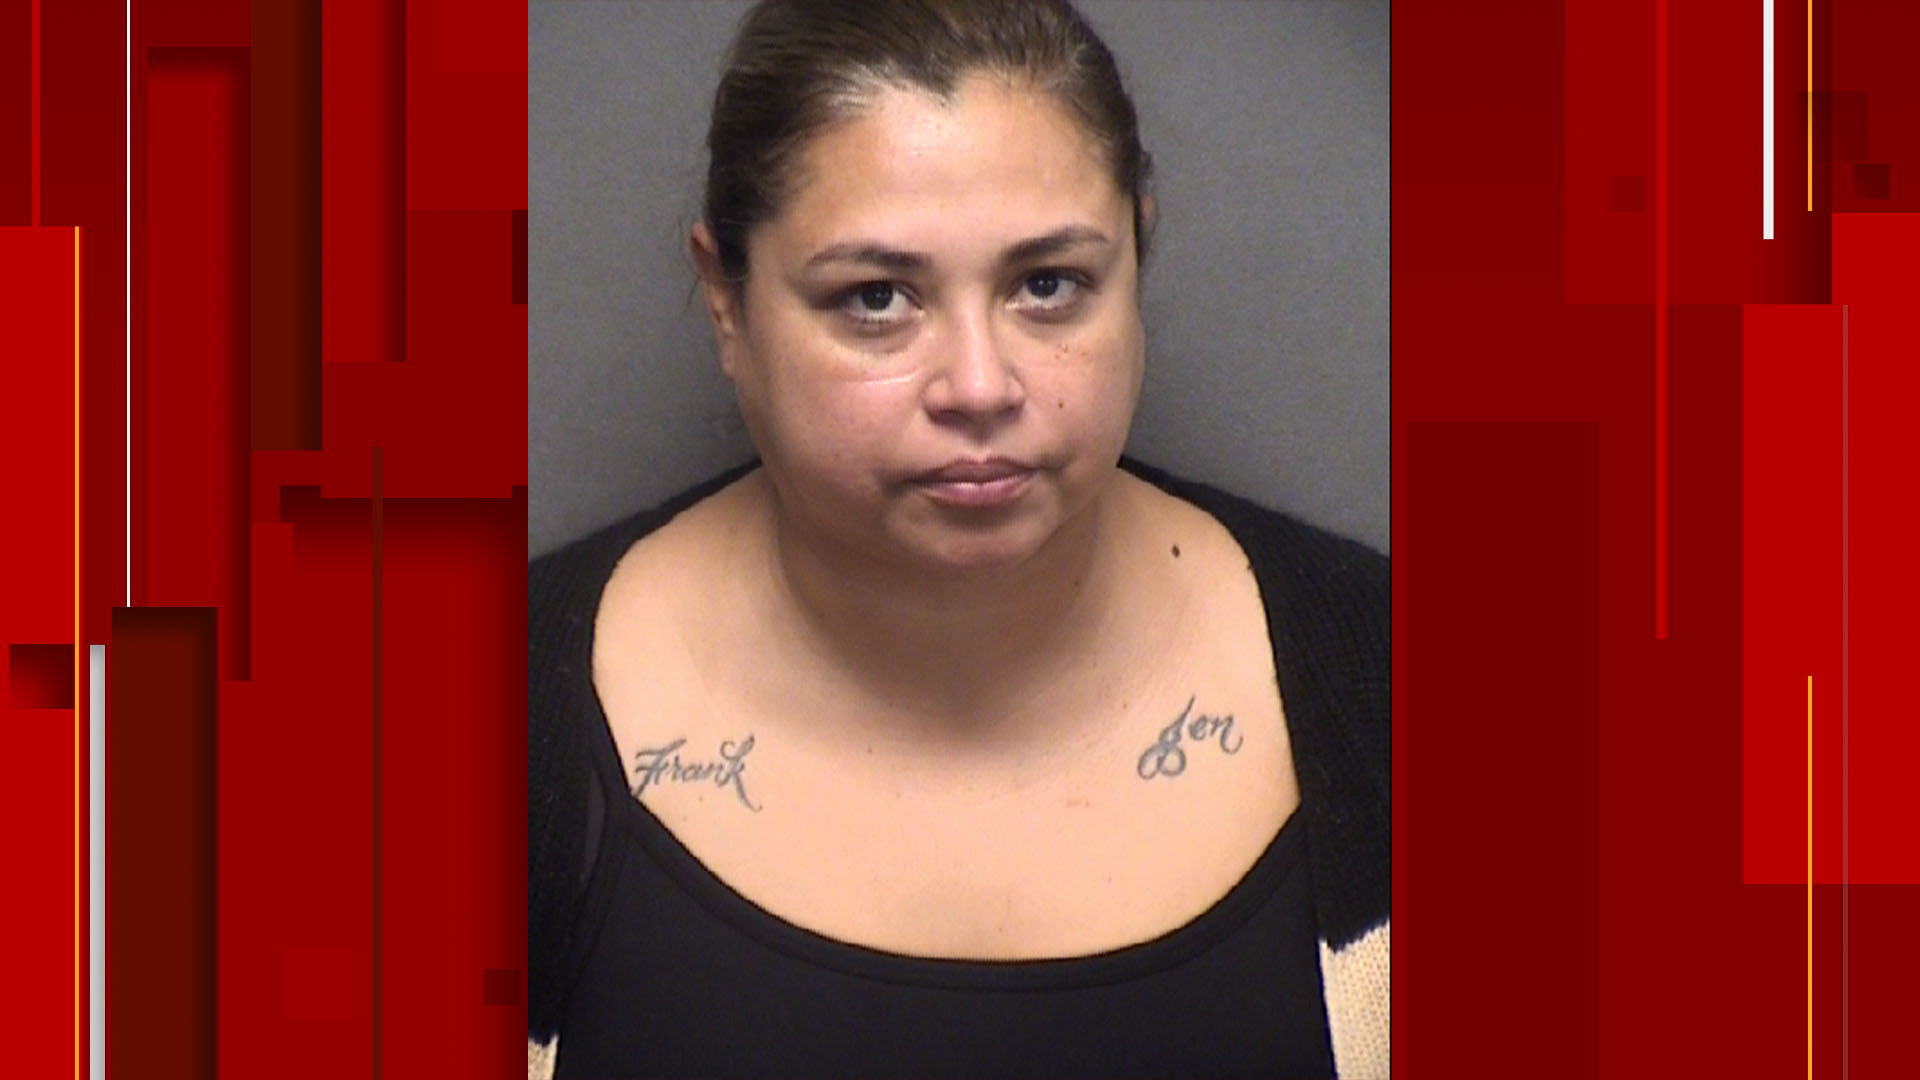 Ex-bookkeeper arrested for stealing more than $185,000 from San Antonio homebuilder, records show